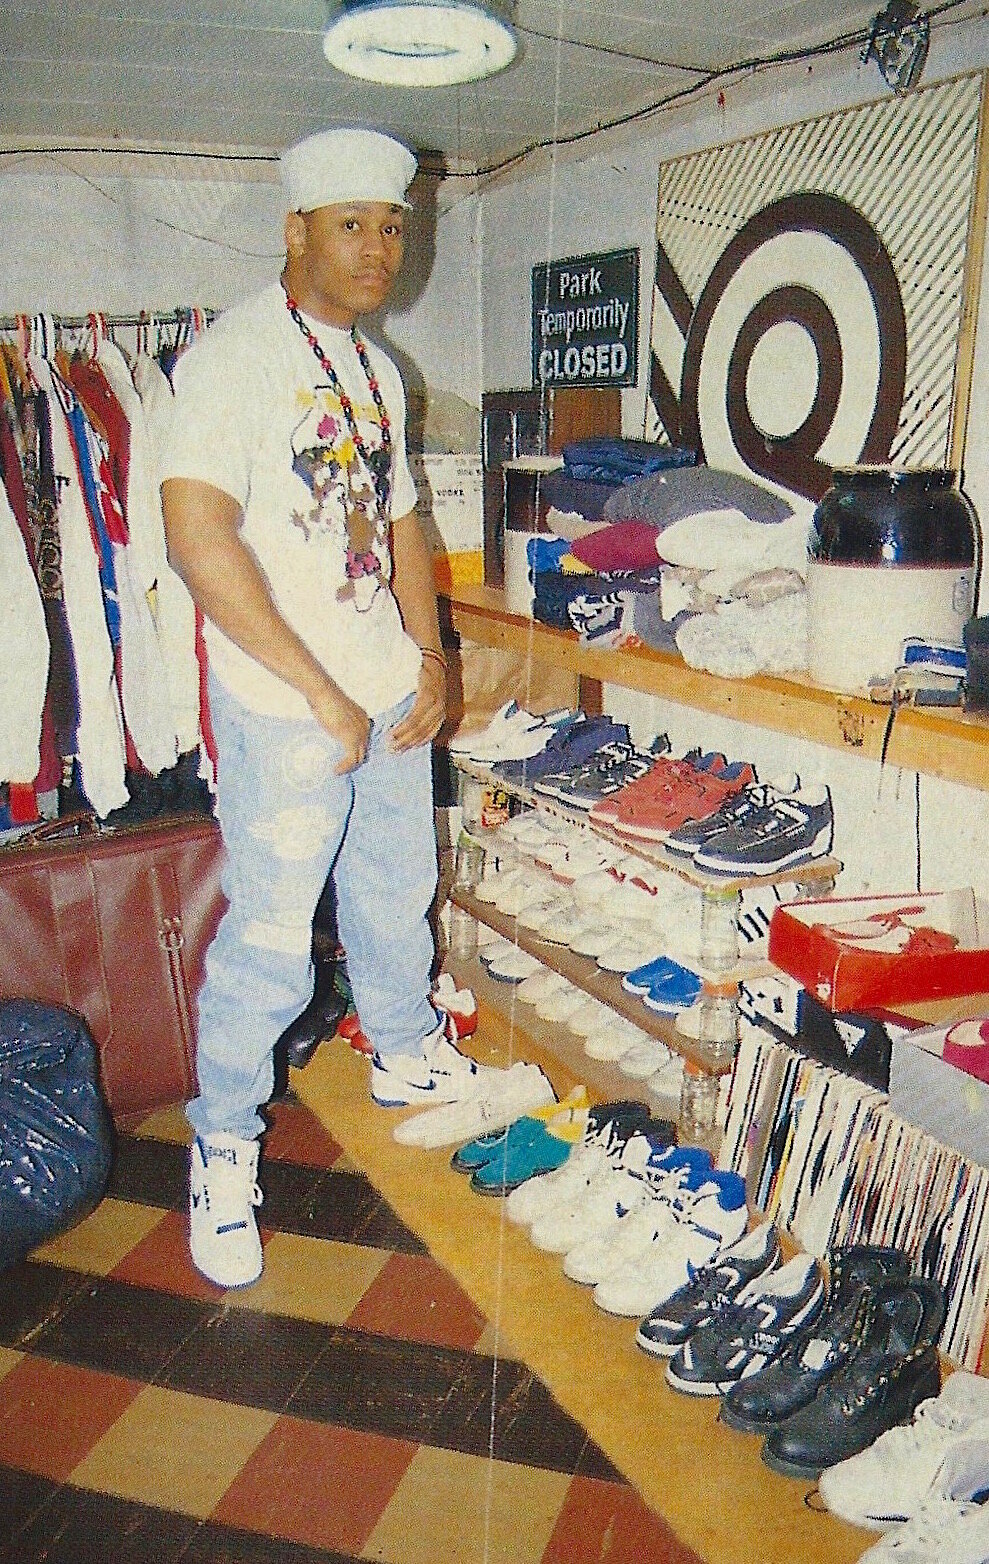 LL Cool J with his sneakers